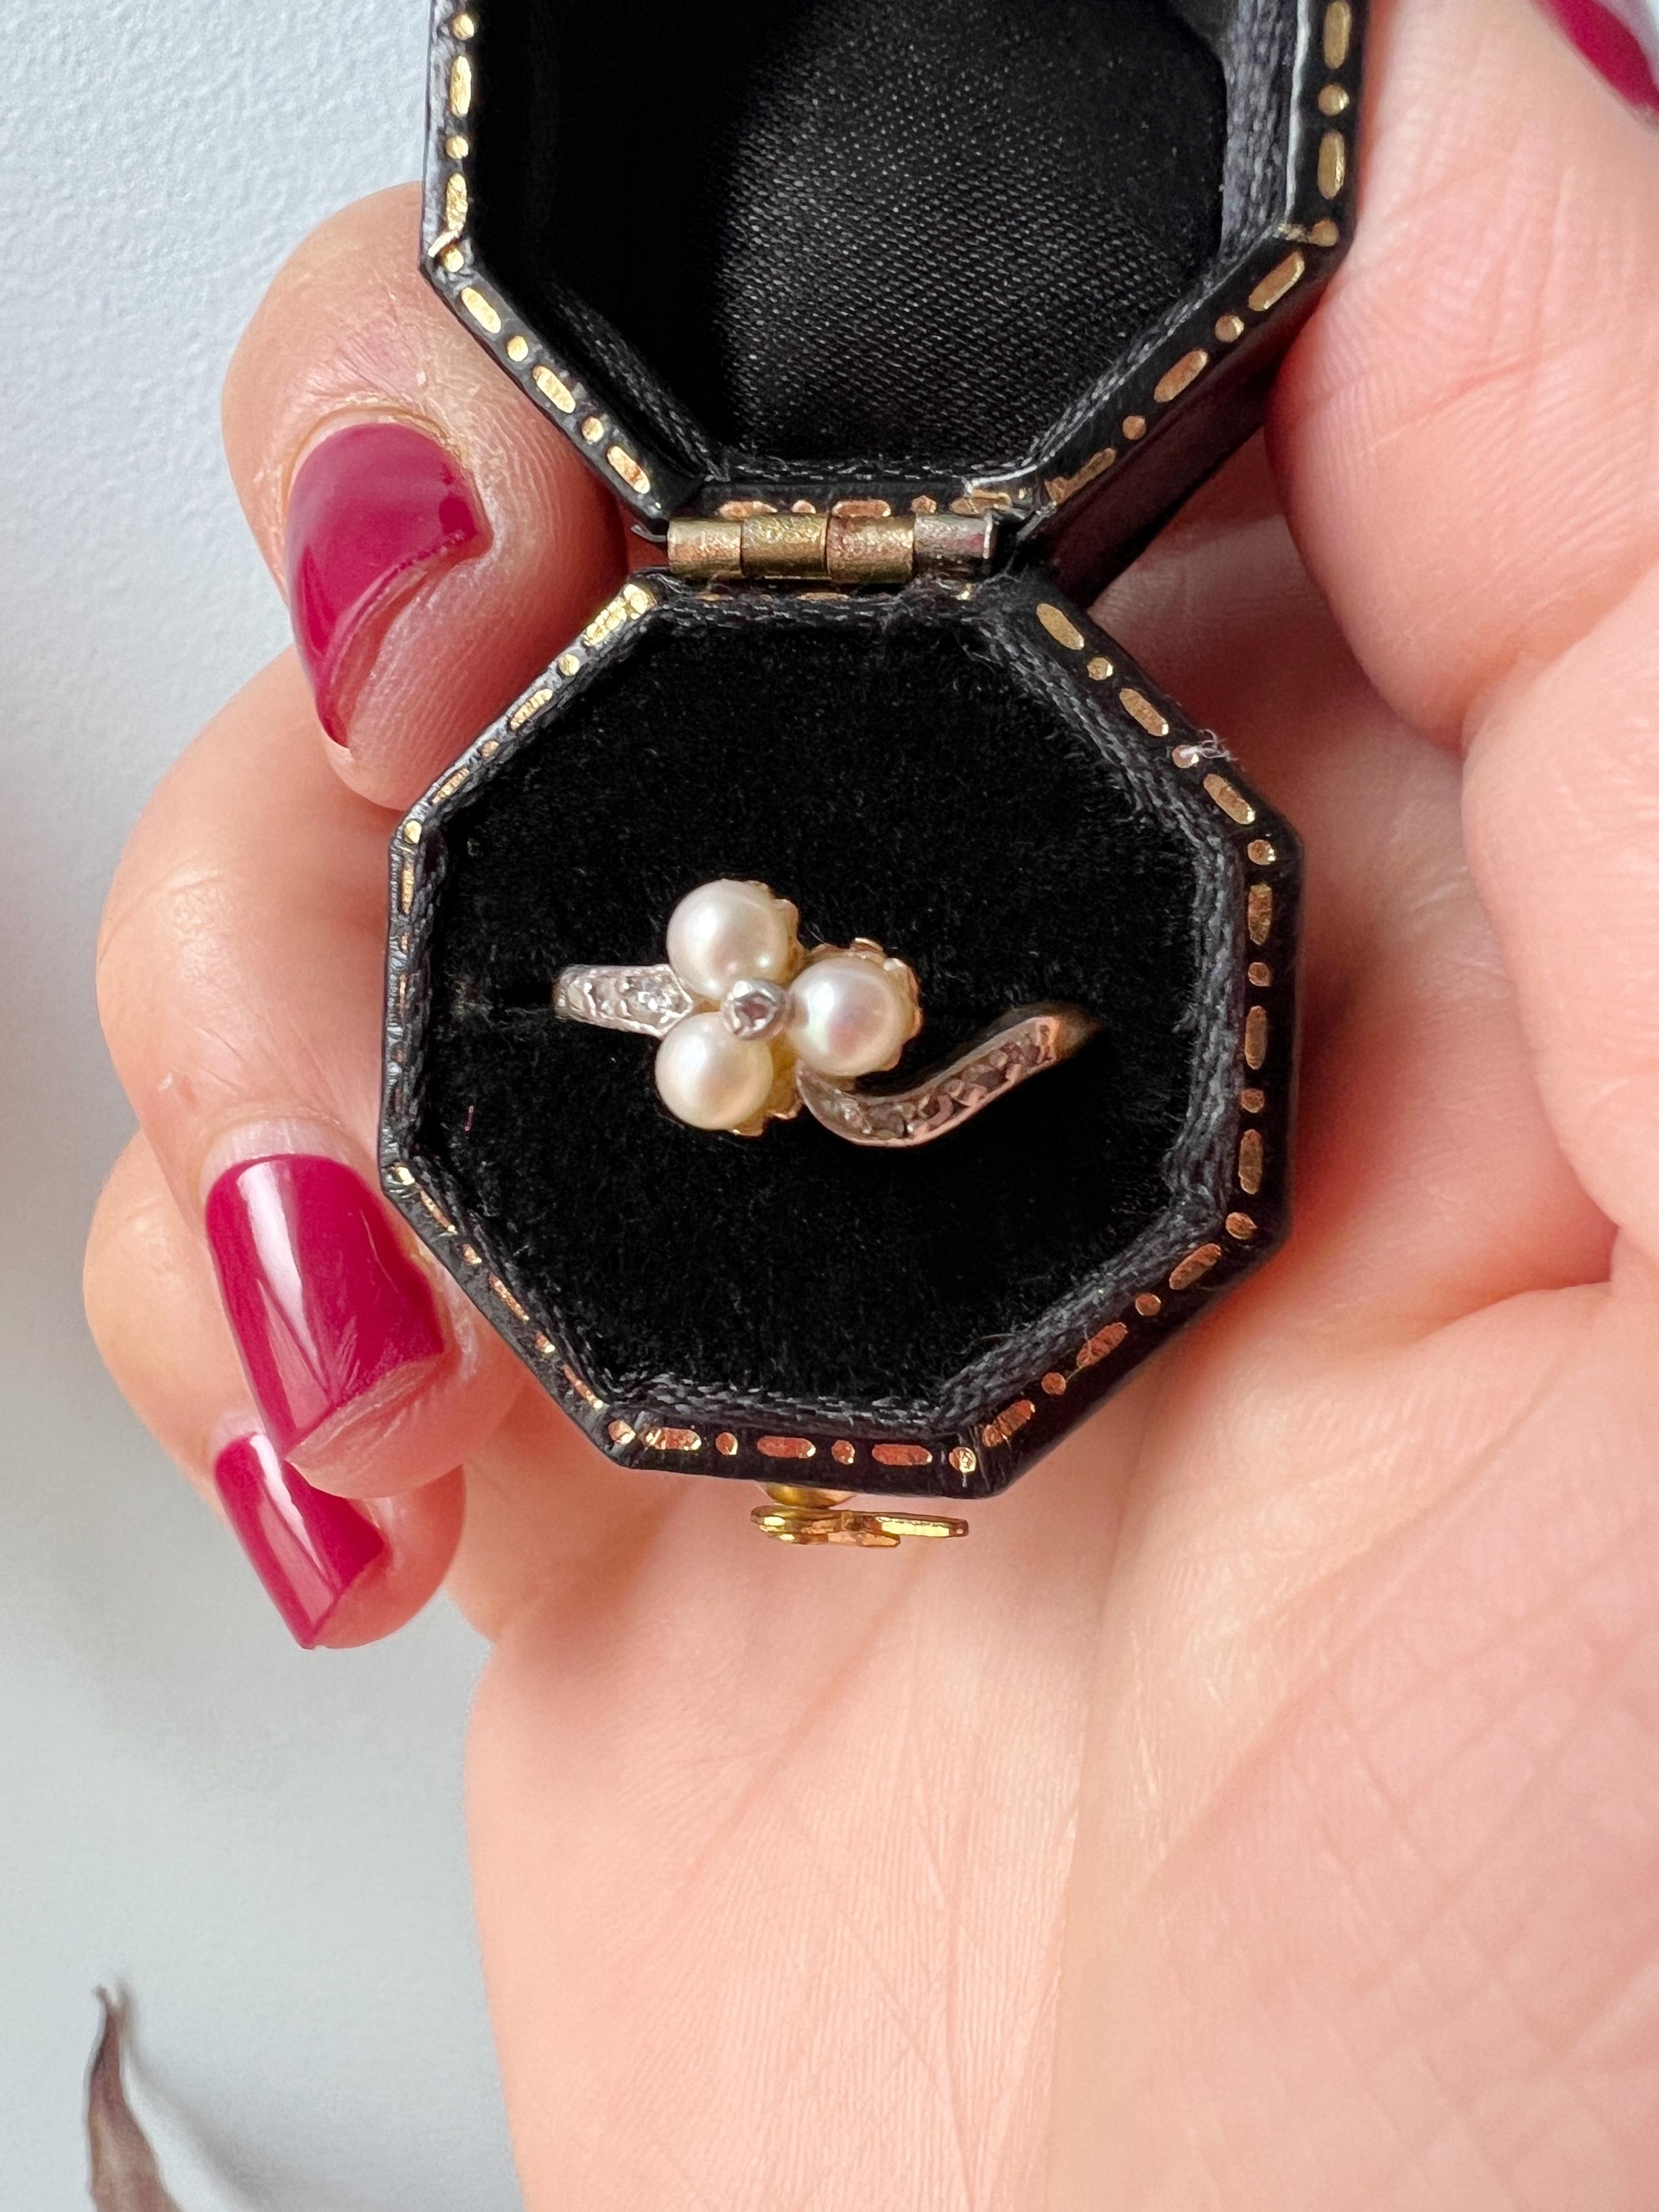 If you are looking for some softness to start the new year gently, this very sweet Victorian era clover ring is made for you.

The ring features a three leaves clover made of natural seed pearls, with a rose cut diamond in the center. The pearls